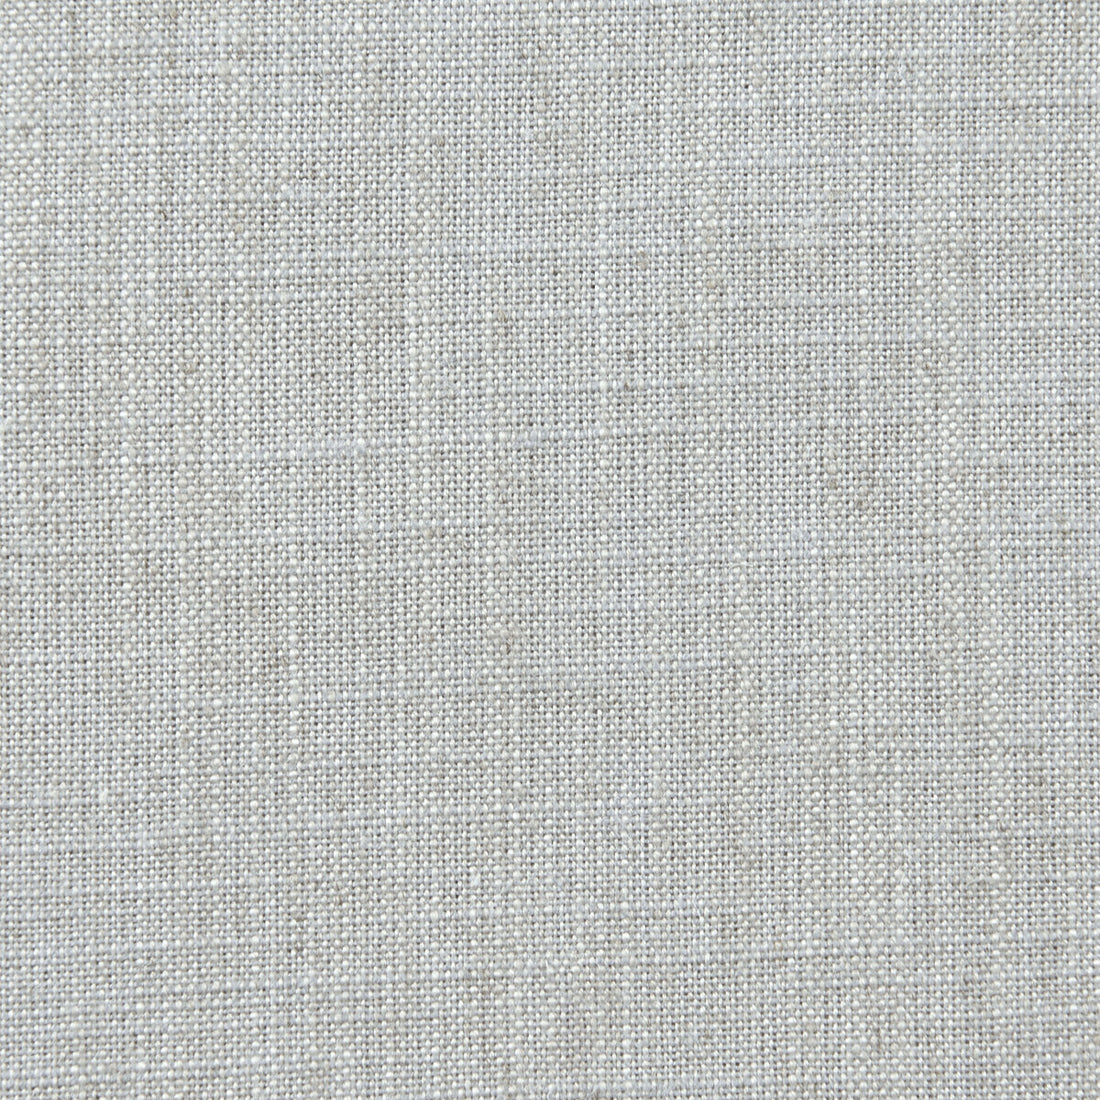 Biarritz fabric in seagull color - pattern F0965/41.CAC.0 - by Clarke And Clarke in the Clarke &amp; Clarke Biarritz collection